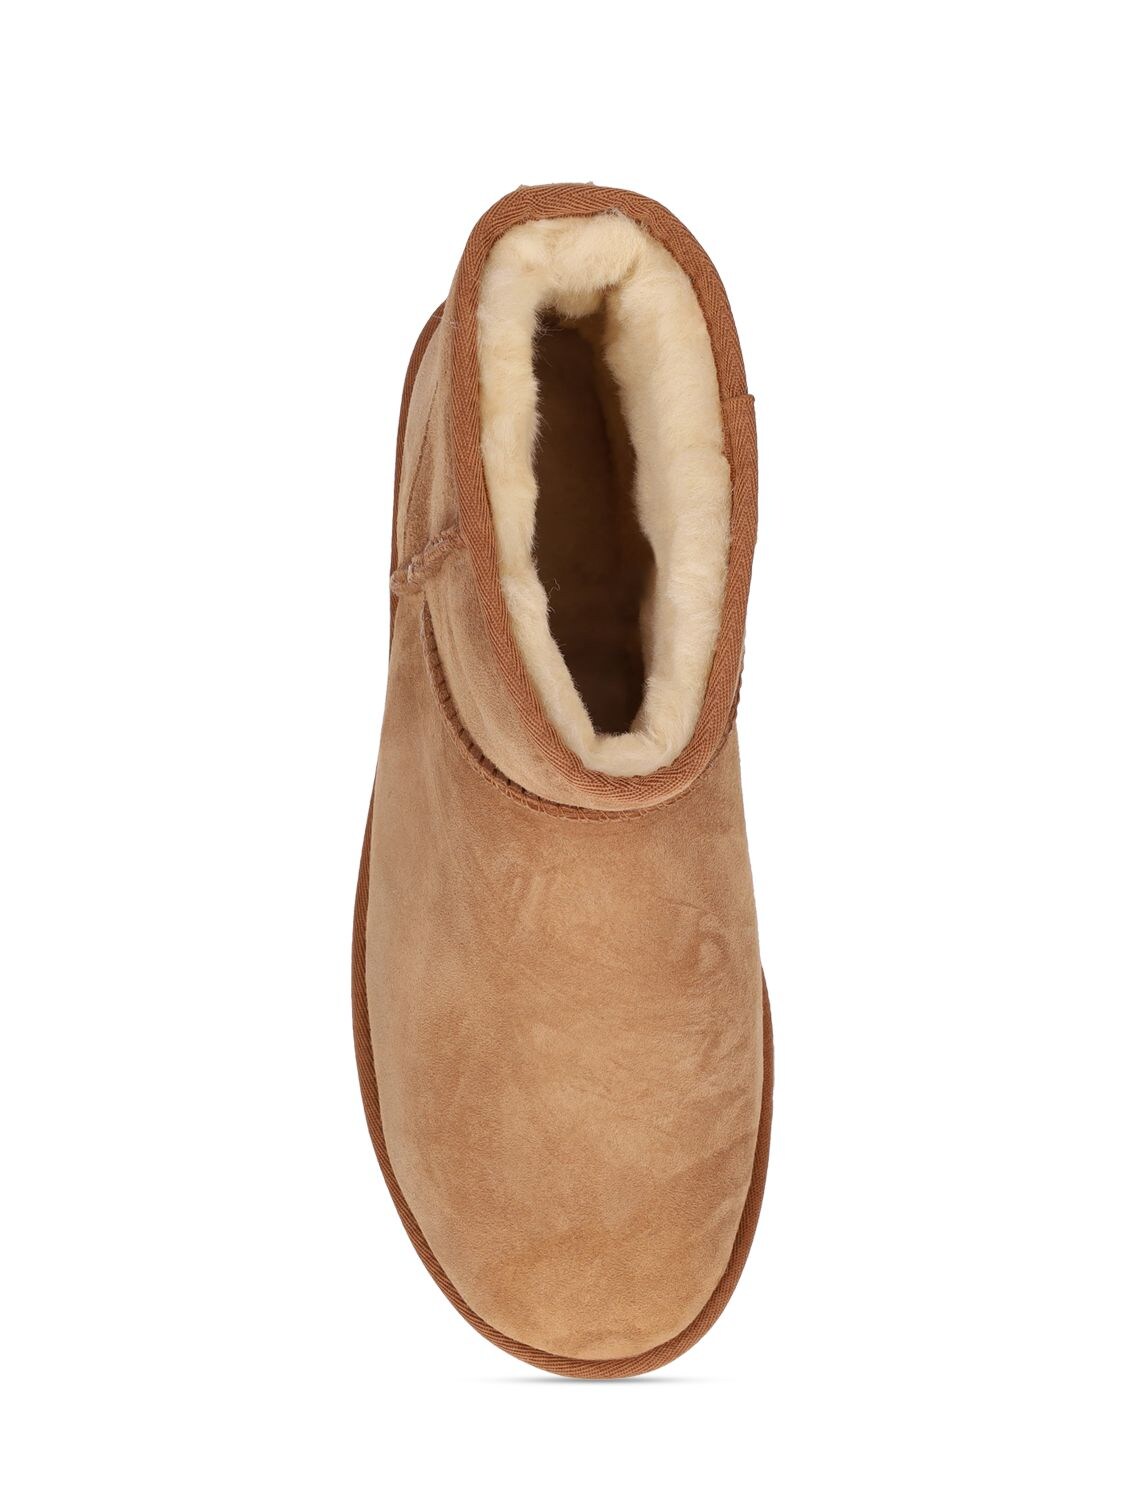 Shop Ugg 10mm Classic Mini Shearling Boots In Chestnut